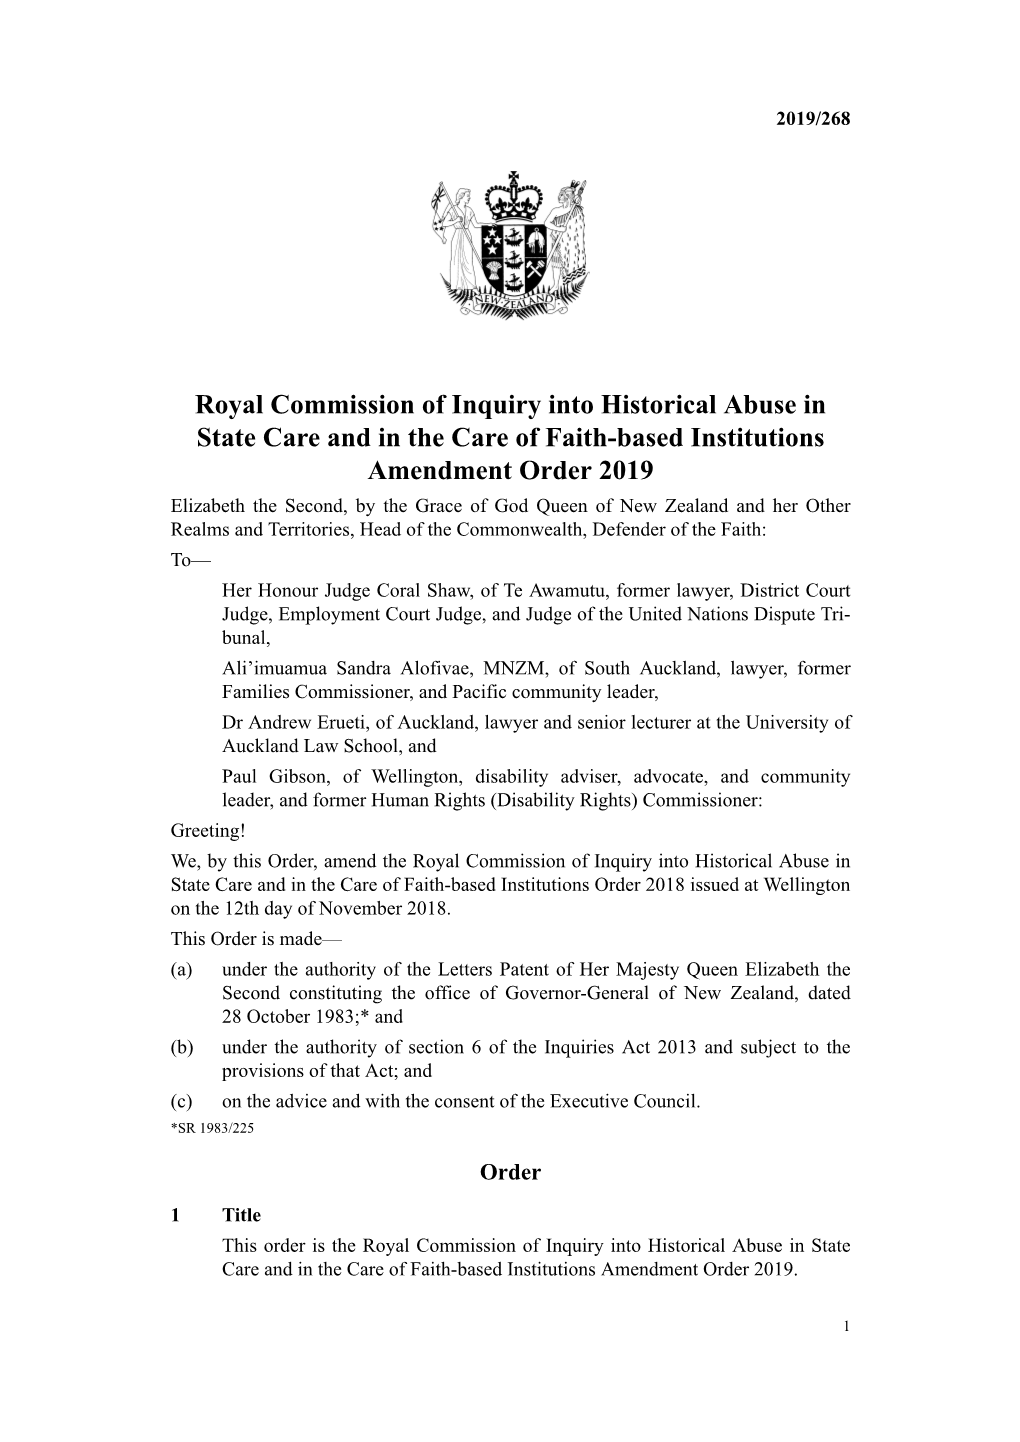 Royal Commission of Inquiry Into Historical Abuse in State Care And